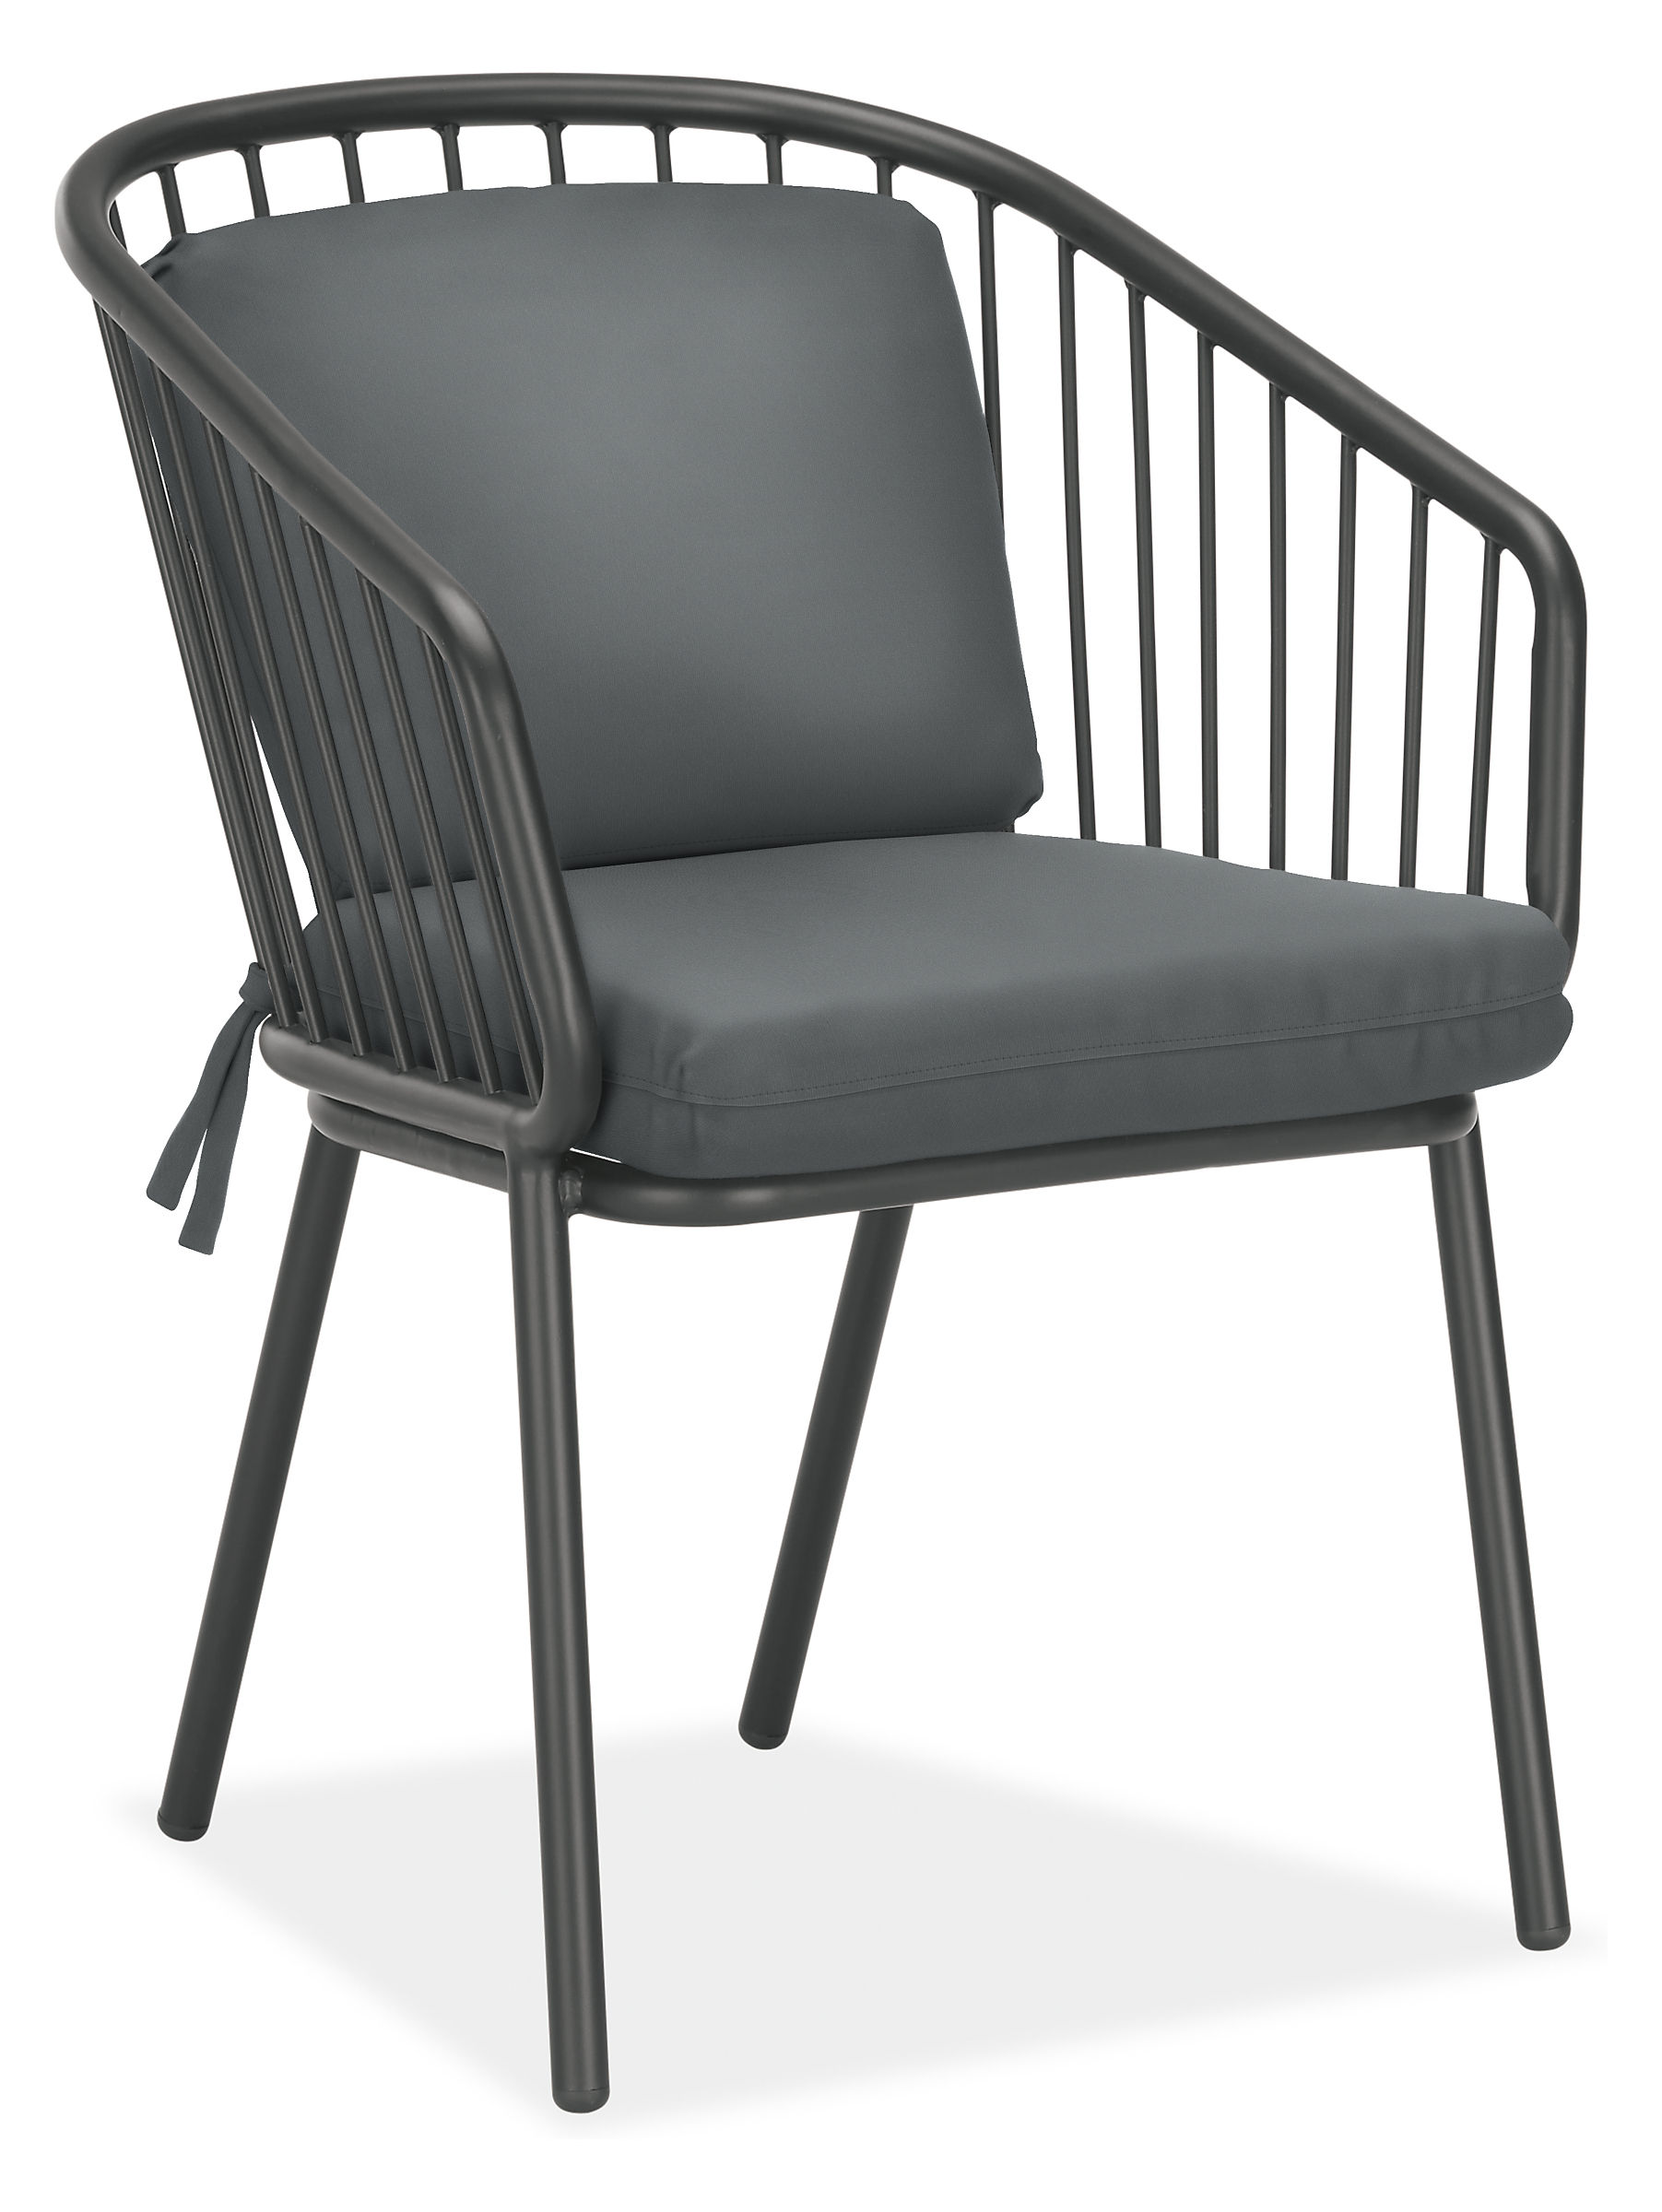 Delaney Dining Chair in Noah Charcoal with Graphite Frame